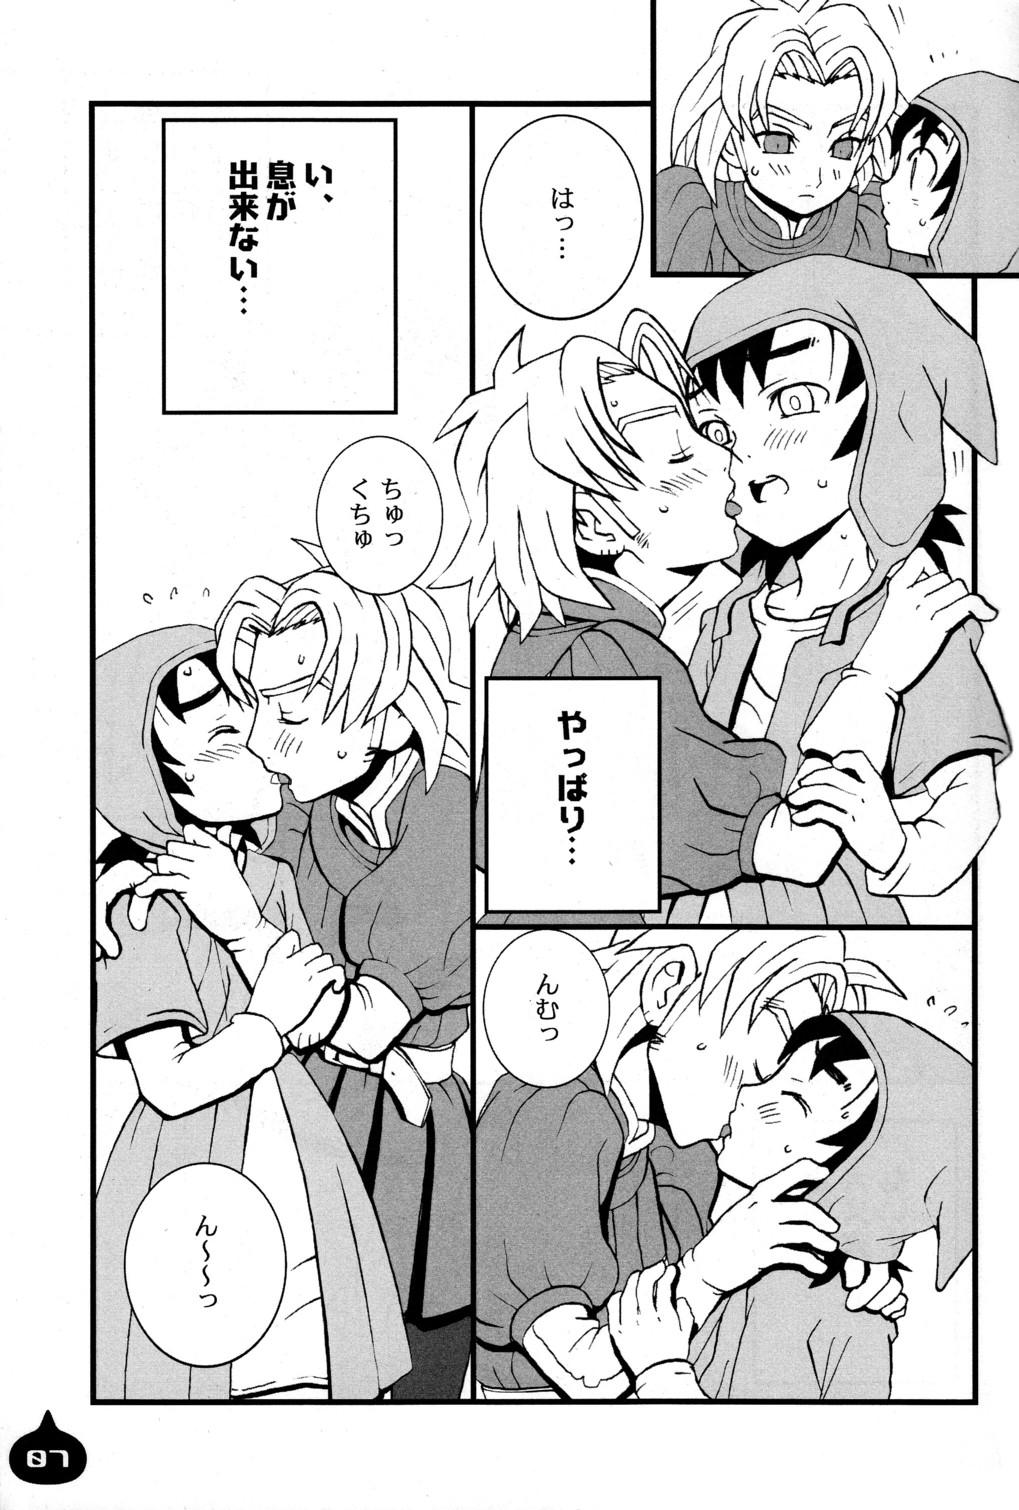 Anime LITTLE L - Dragon quest vii Lord of lords ryu knight | haou taikei ryuu knight Gay Deepthroat - Page 7